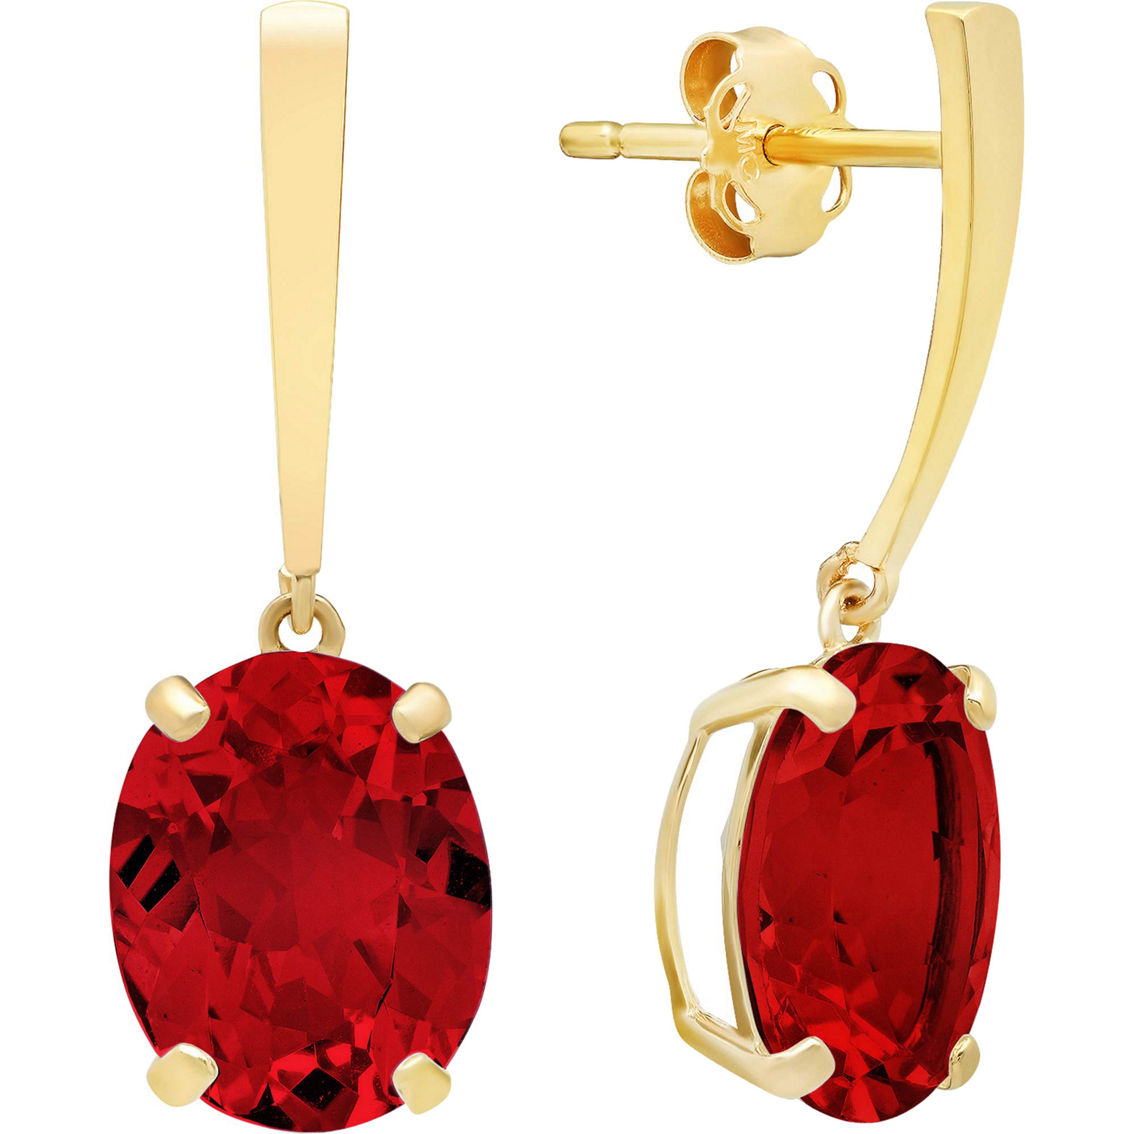 14K Gold Oval Cut Lab Created Ruby Solitaire Drop Earrings - Image 1 of 3